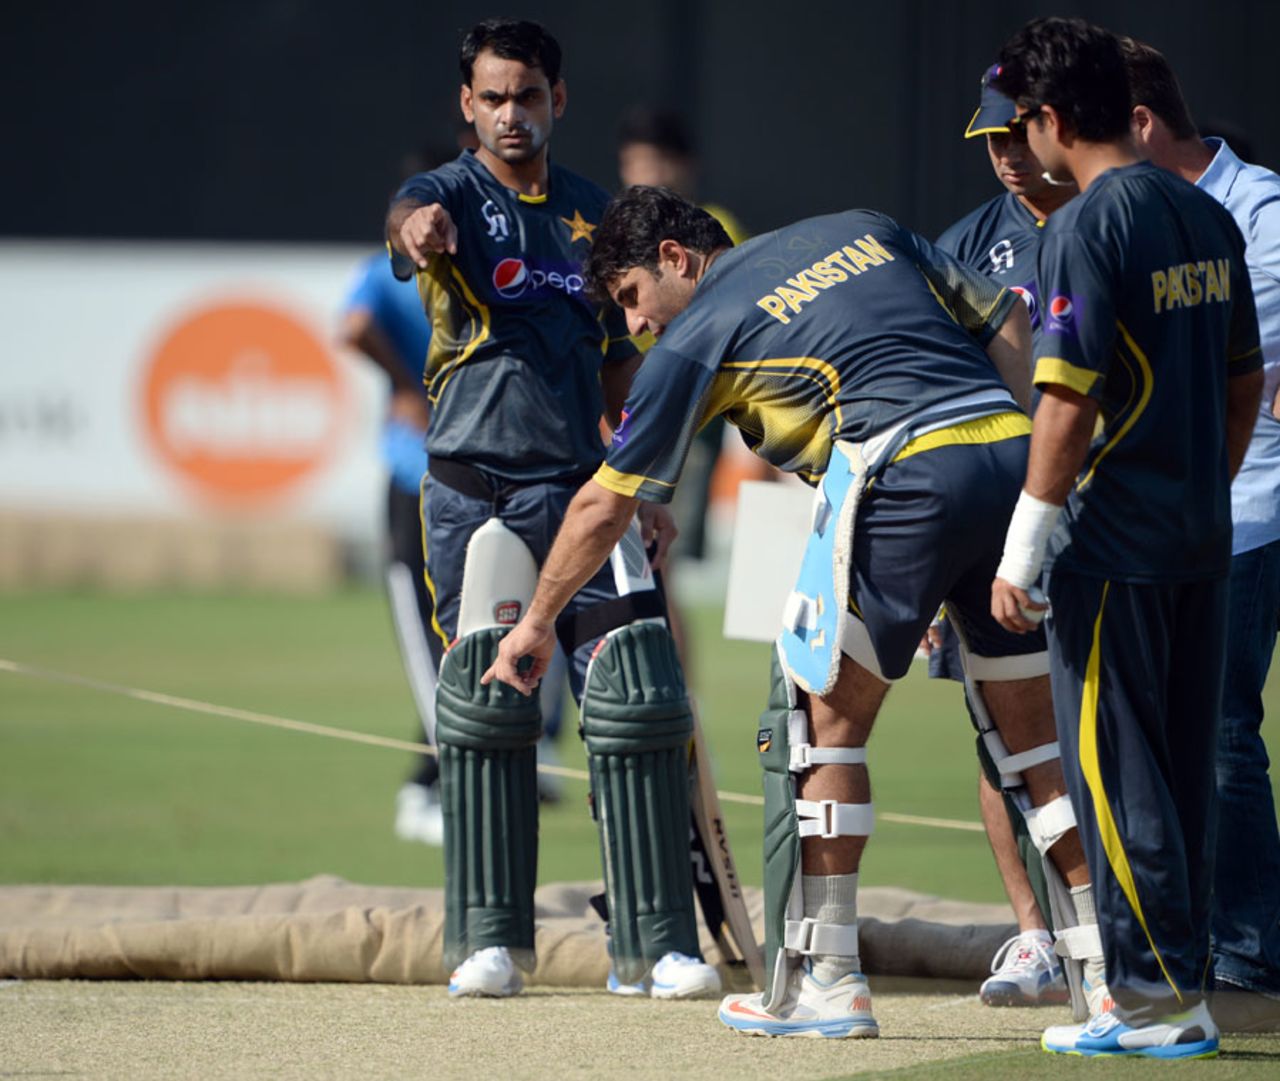 Misbah-ul-Haq and Mohammad Hafeez examine the pitch on the eve of the second ODI, Dubai, October 31, 2013